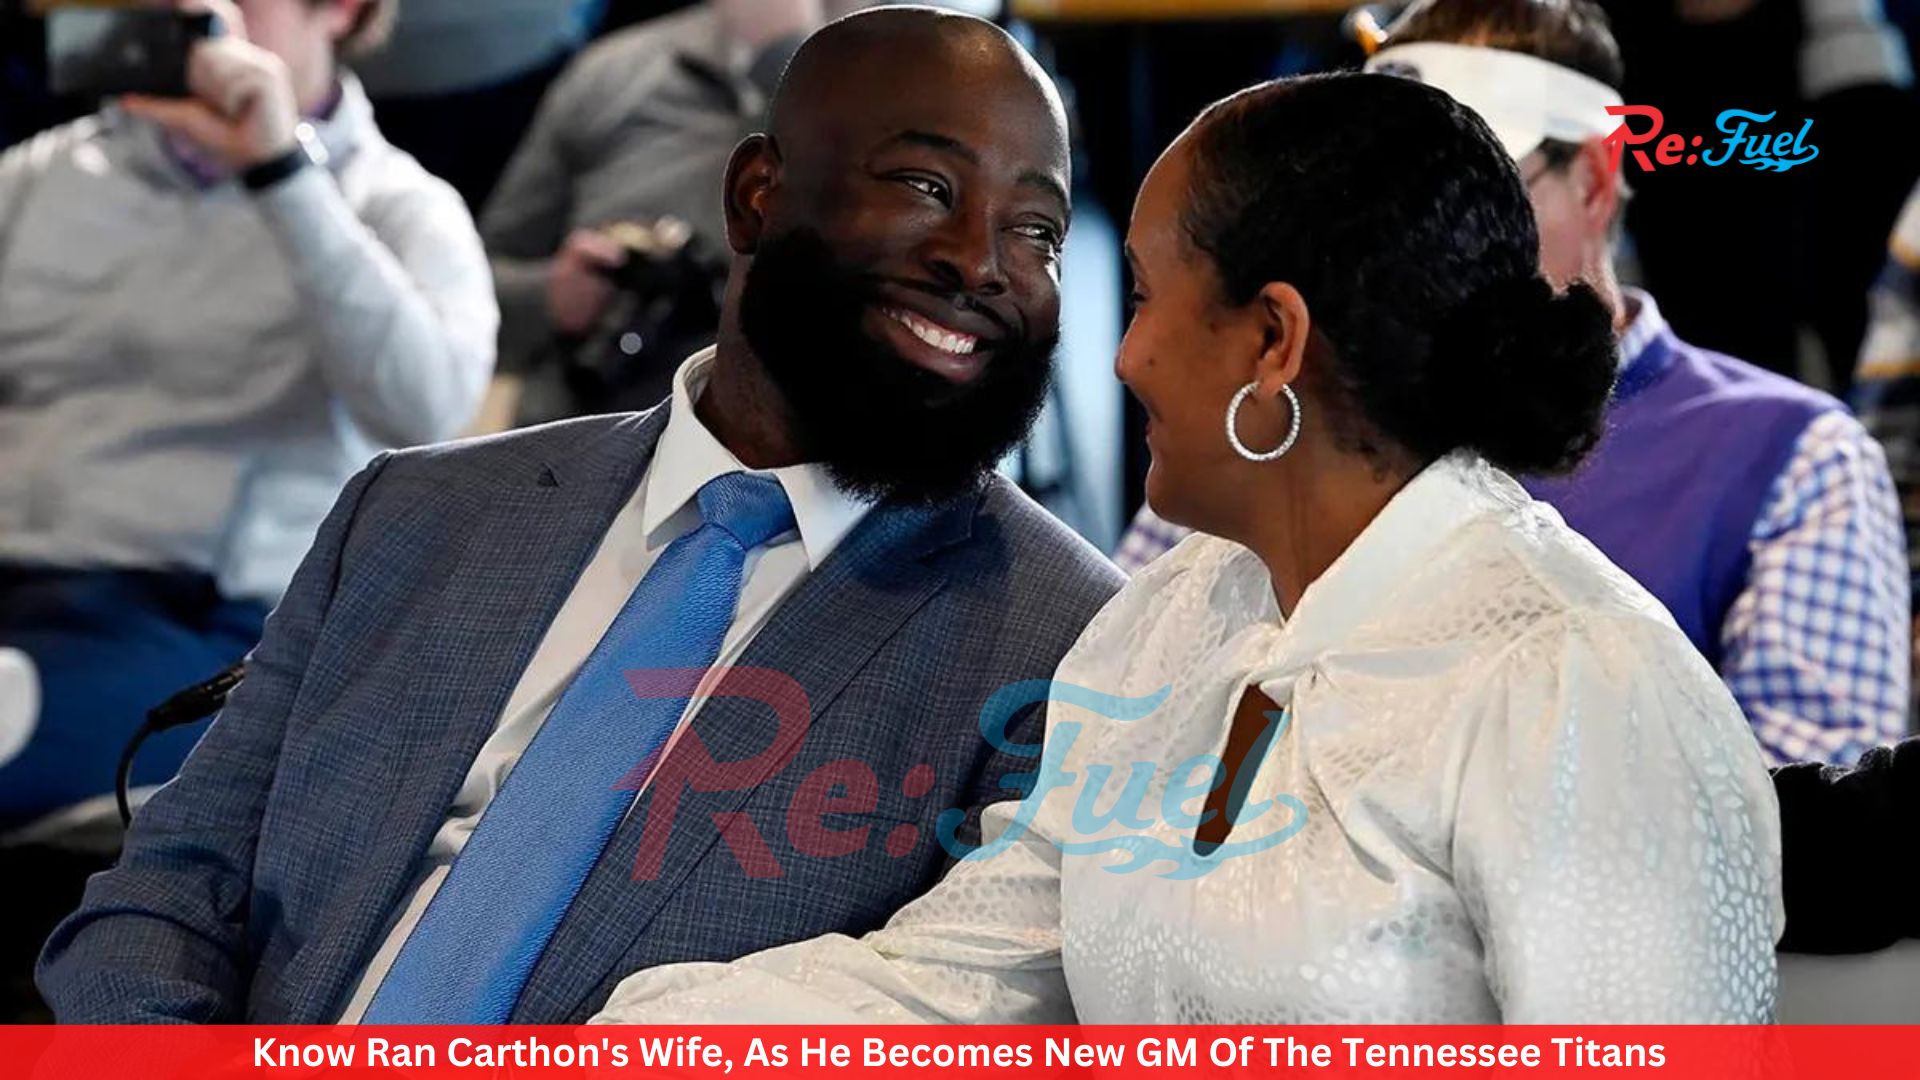 Know Ran Carthon's Wife, As He Becomes New GM Of The Tennessee Titans